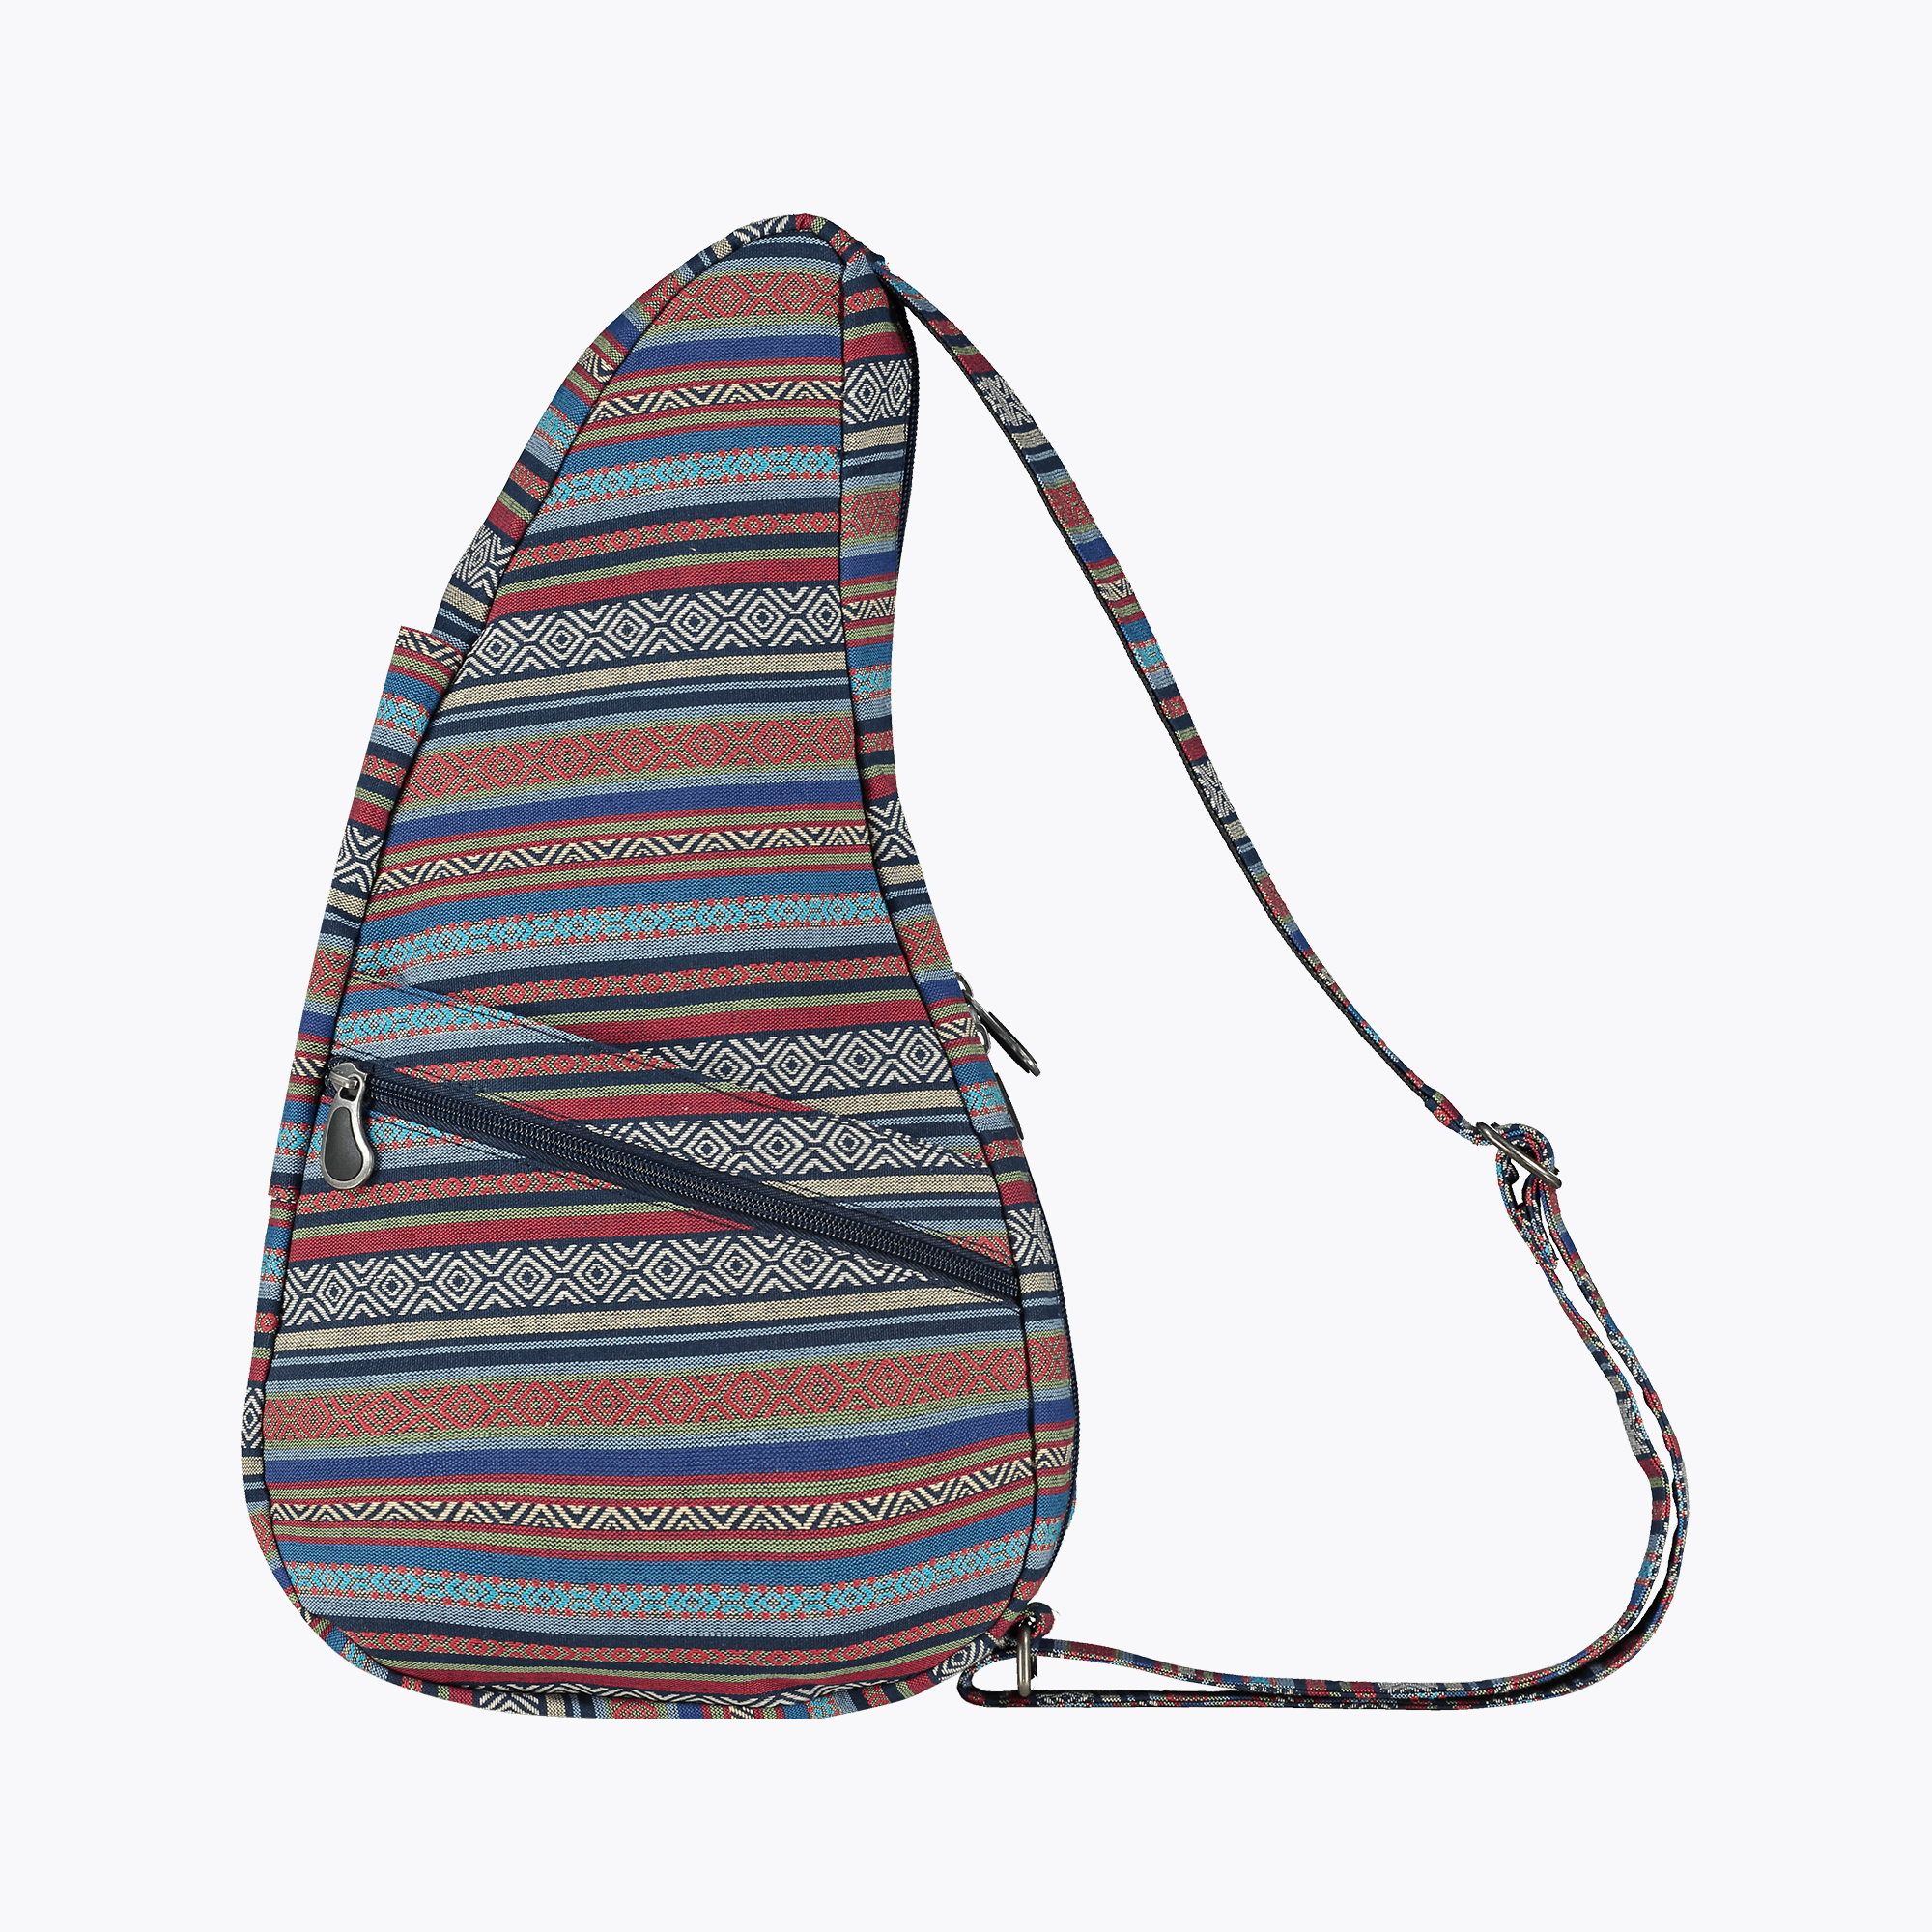 Tribal S by The Healthy Back Bag